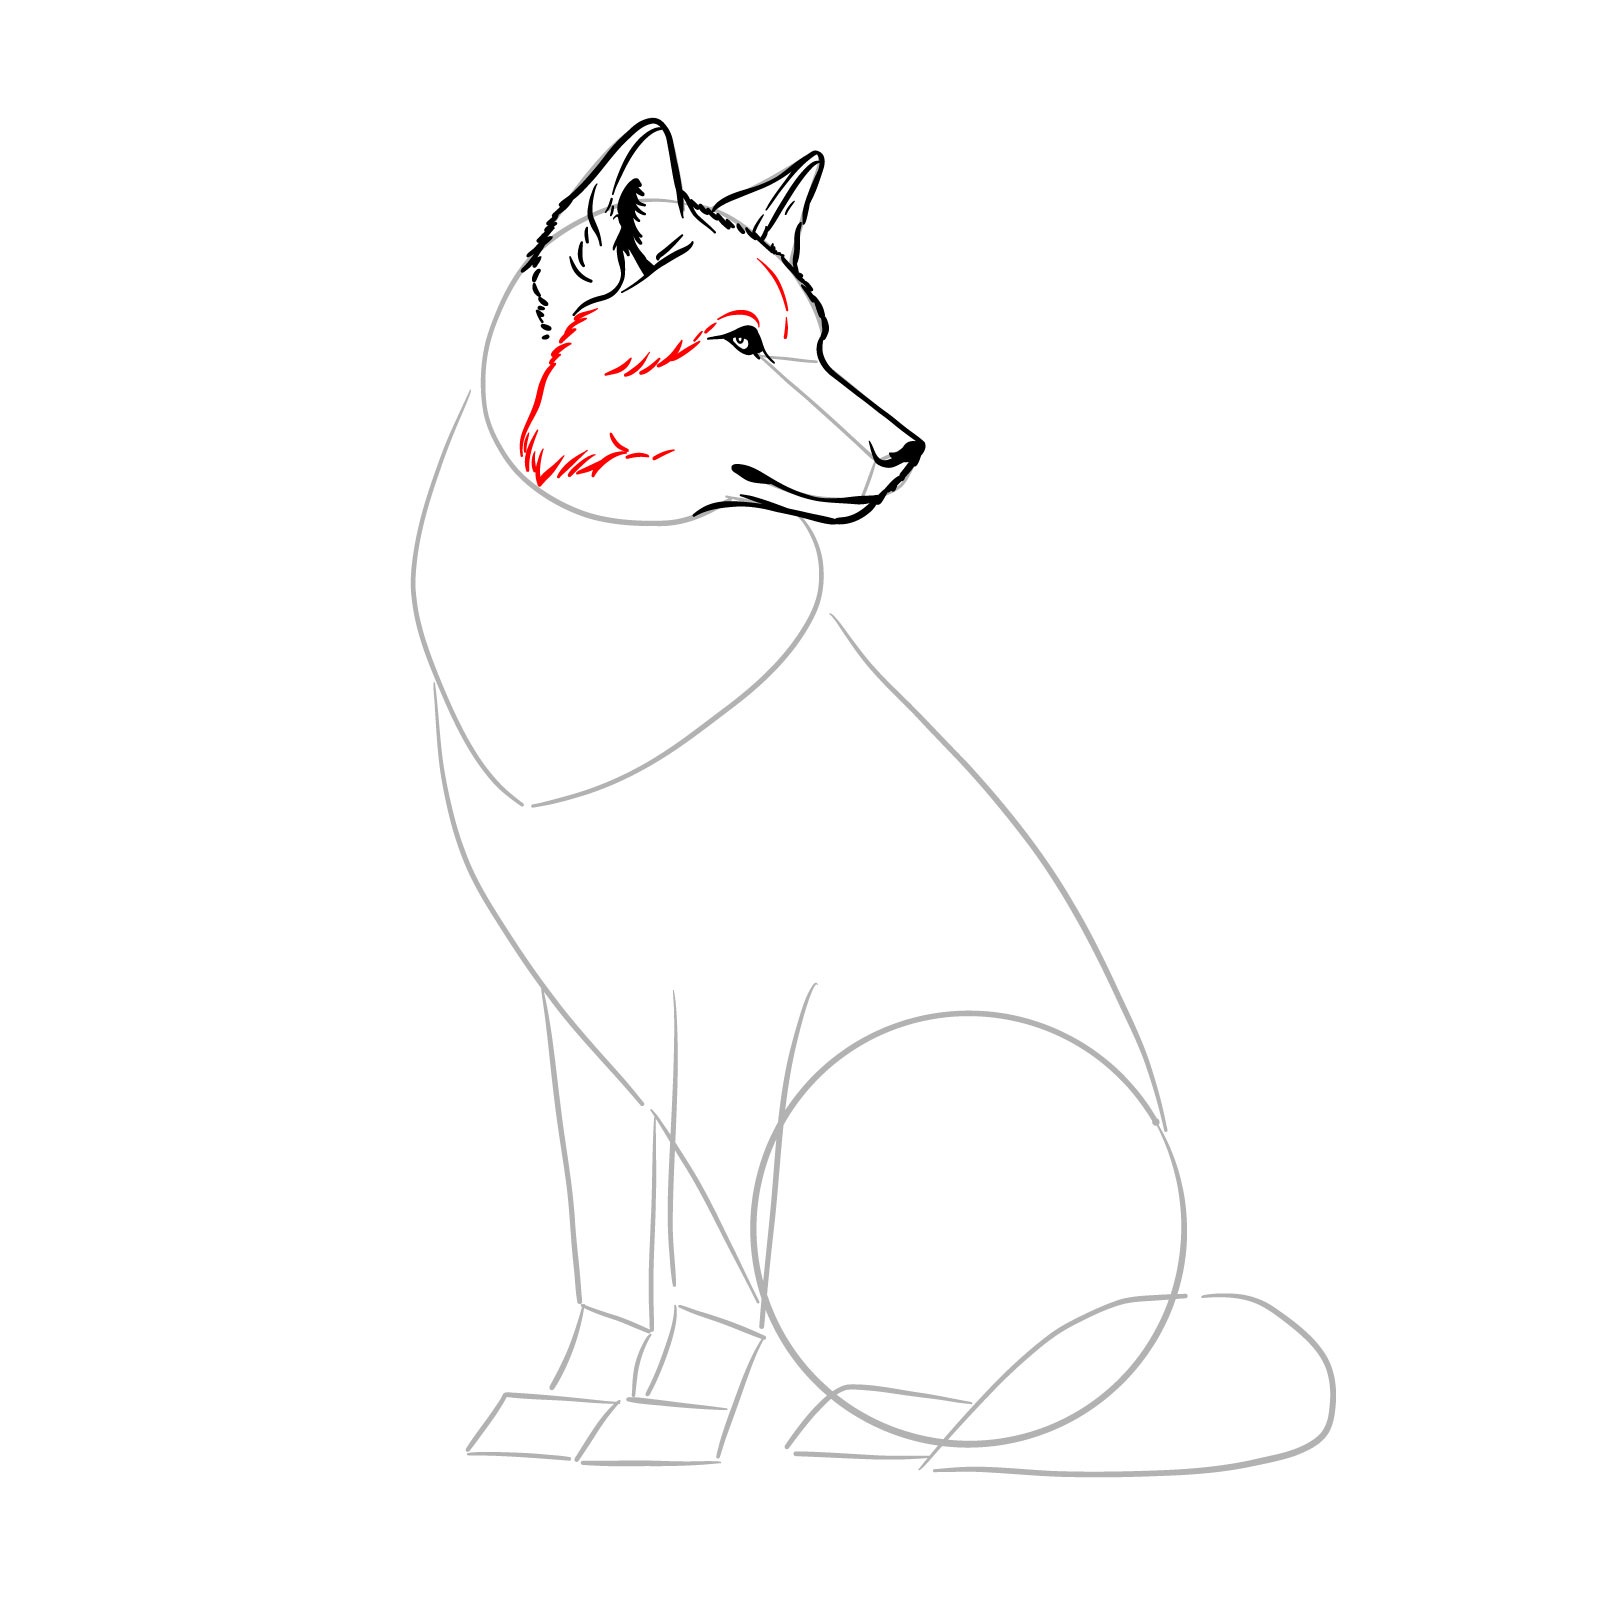 Adding fur detail to the wolf's head in a sitting position drawing - step 09